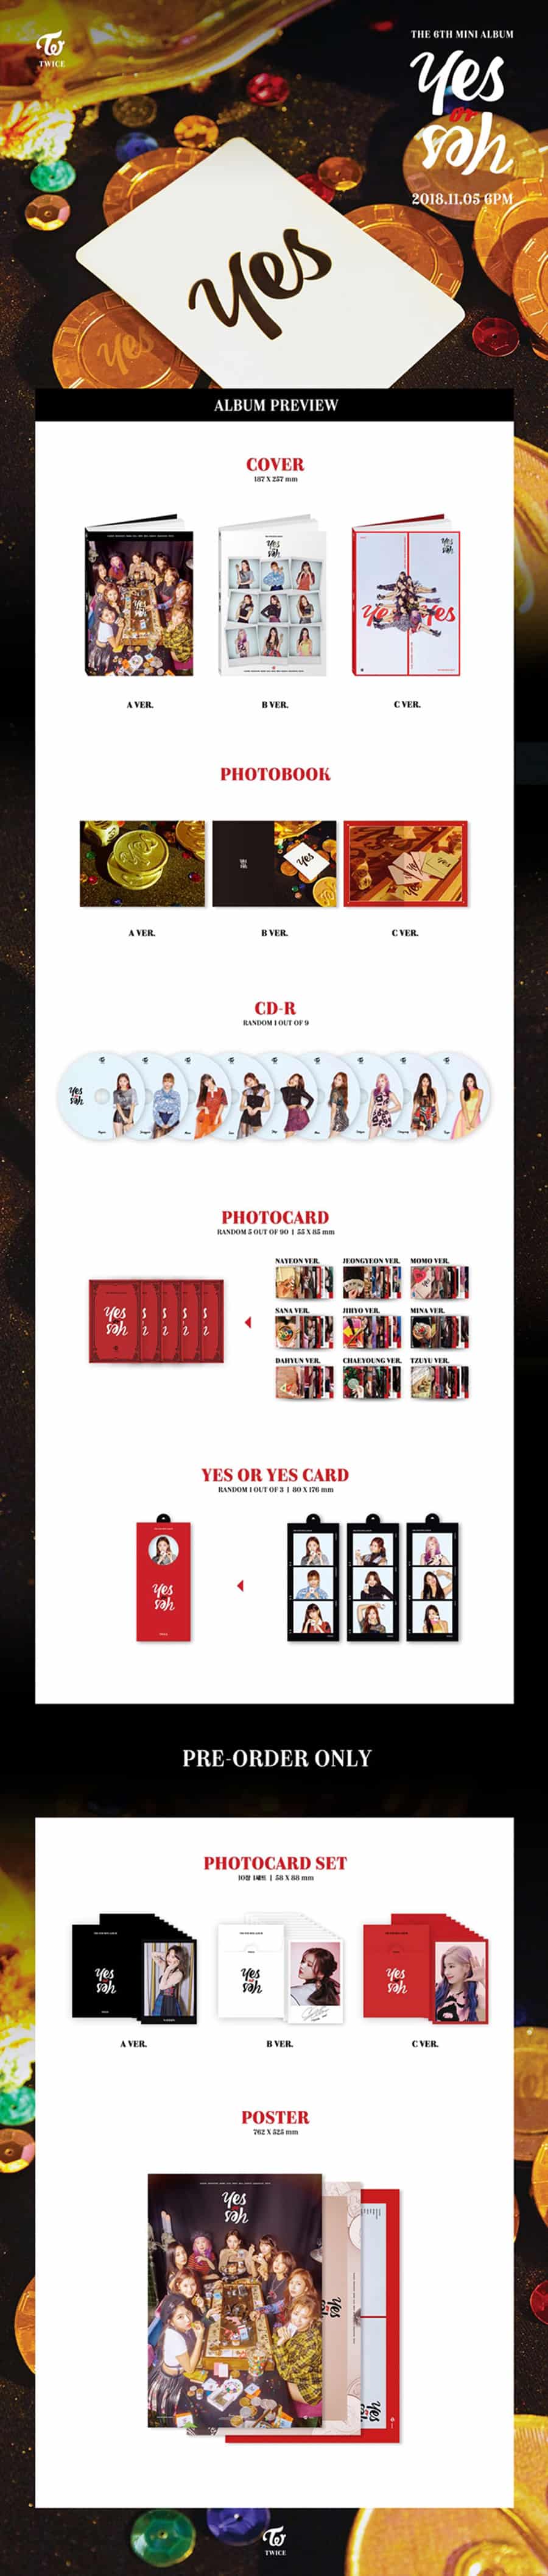 twice-6th-mini-album-yes-or-yes-wholesale